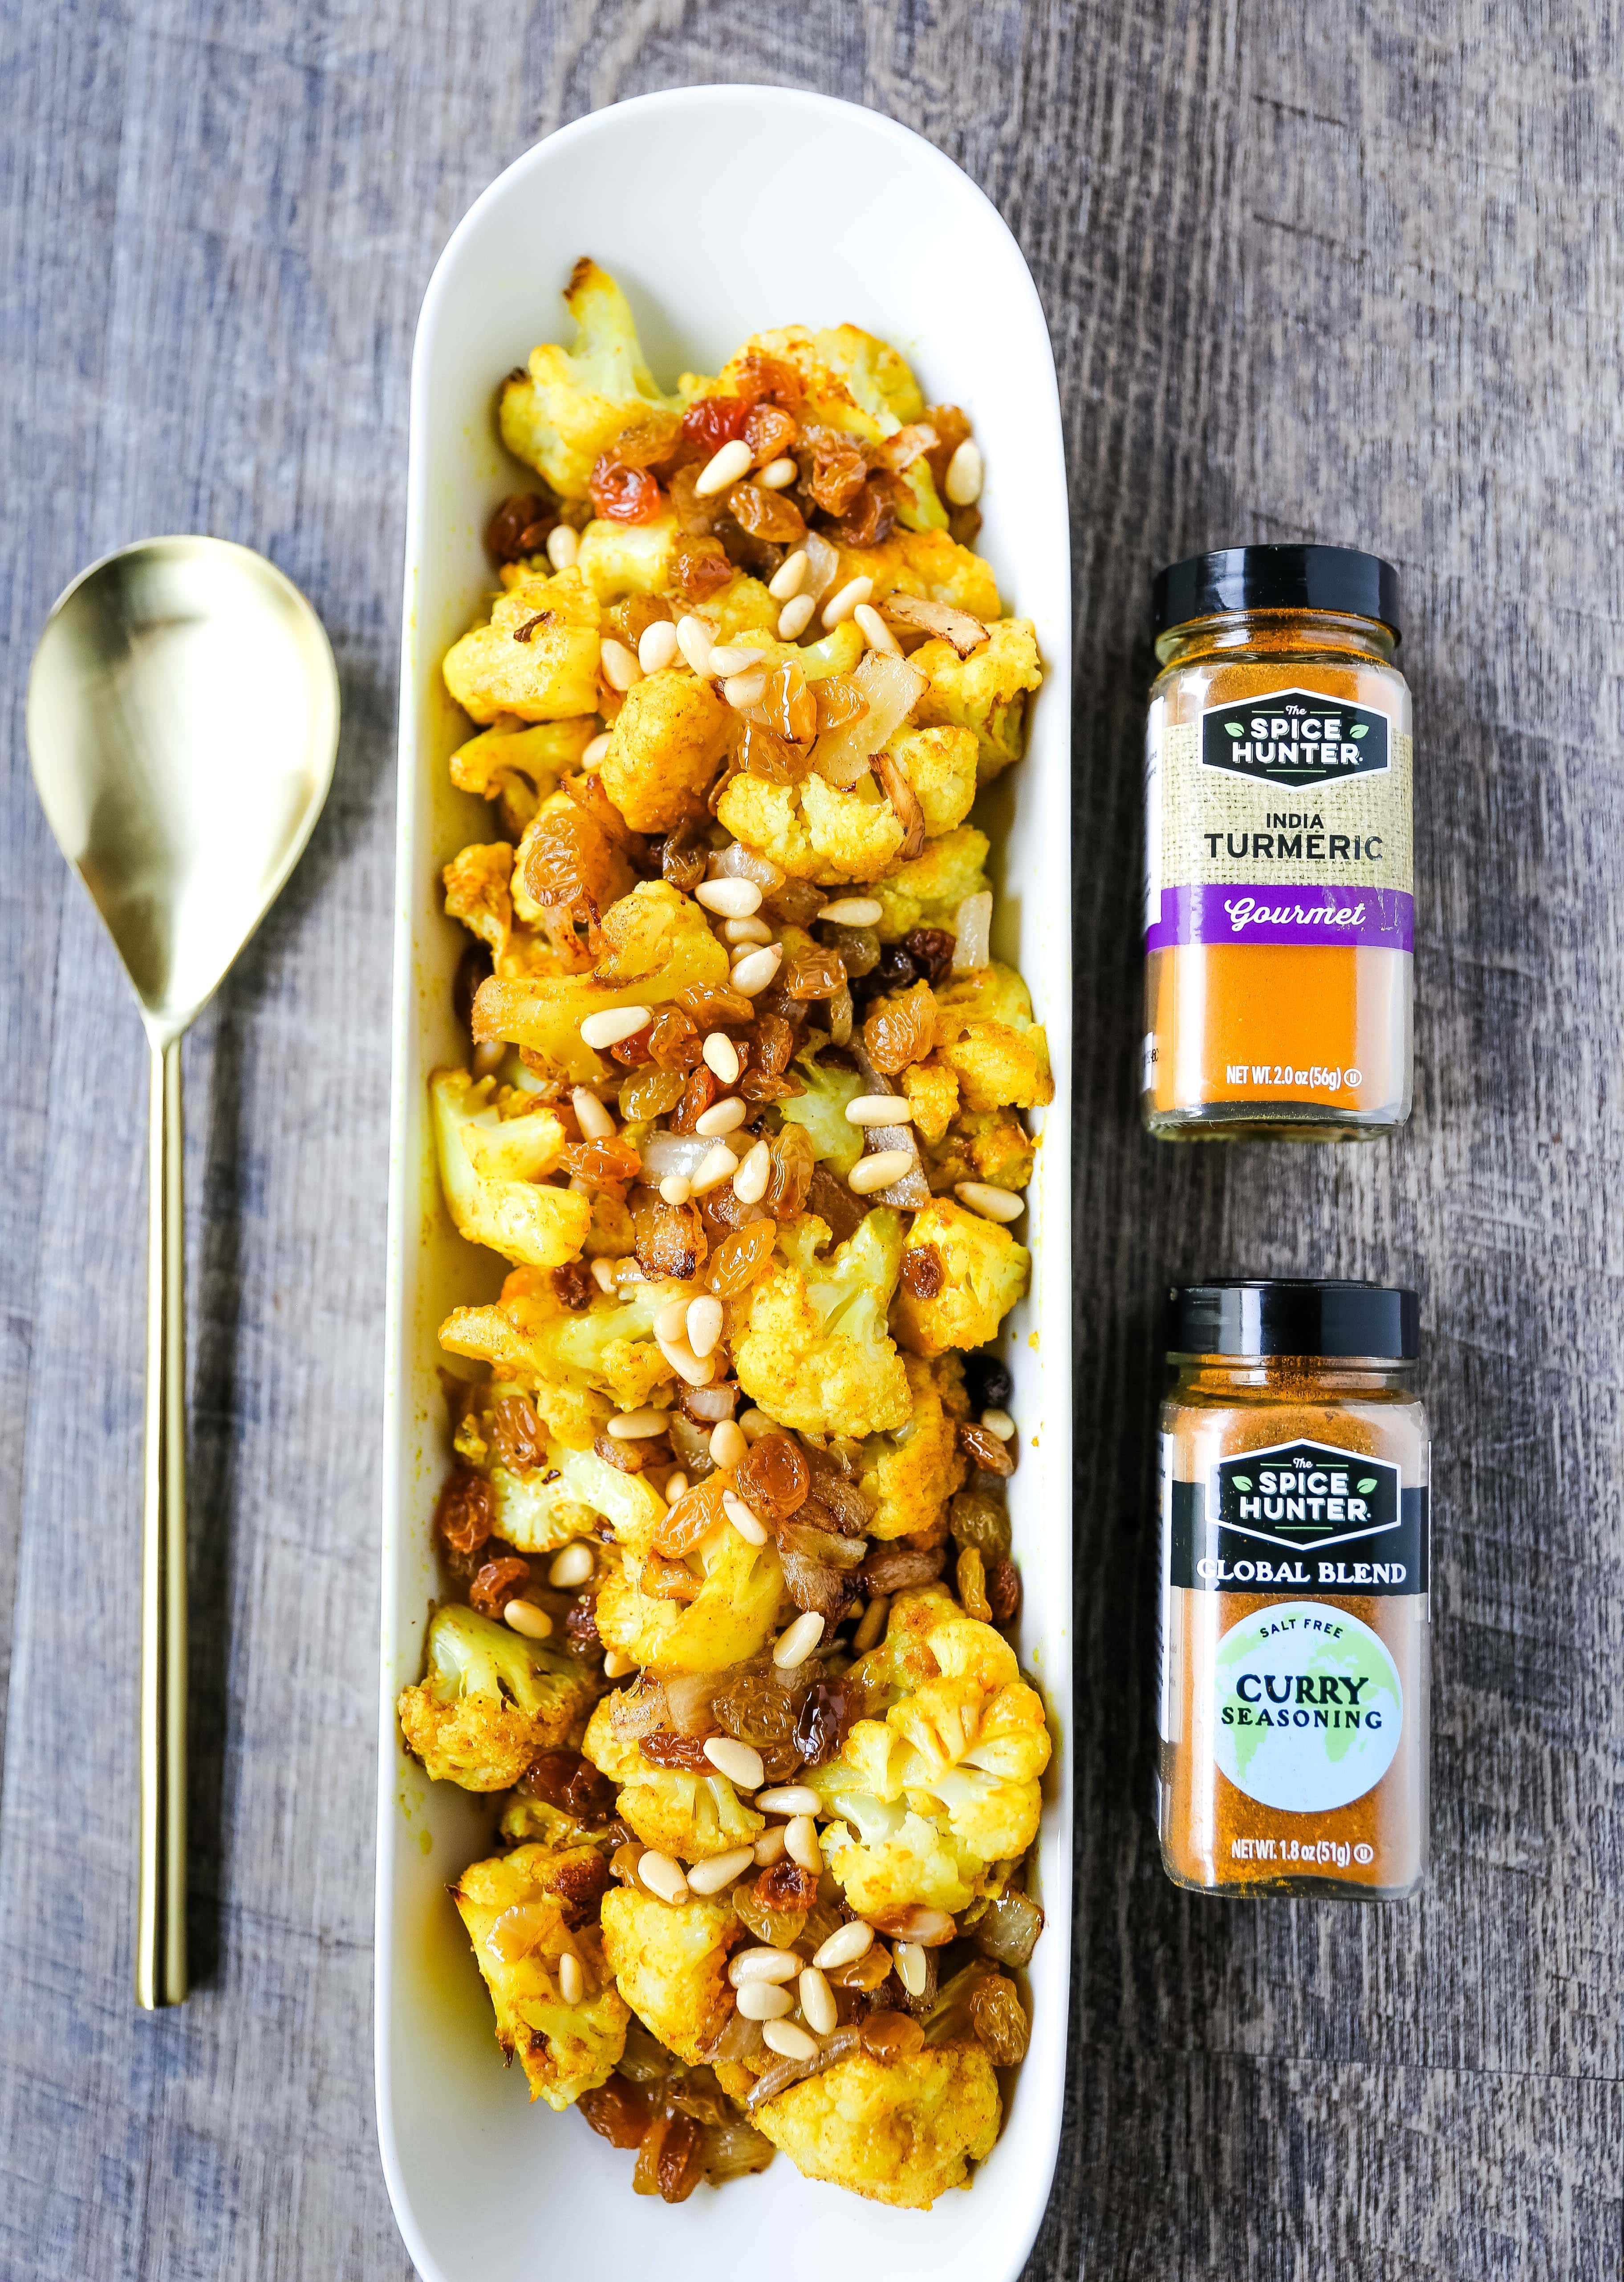 Turmeric Roasted Cauliflower Indian spiced roasted cauliflower with warm spices, caramelized onions, sweet golden raisins, and crunchy pine nuts. A flavorful, healthy side dish perfect for any occasion! www.modernhoney.com #cauliflower #sidedish #roastedvegetables #indianfood 